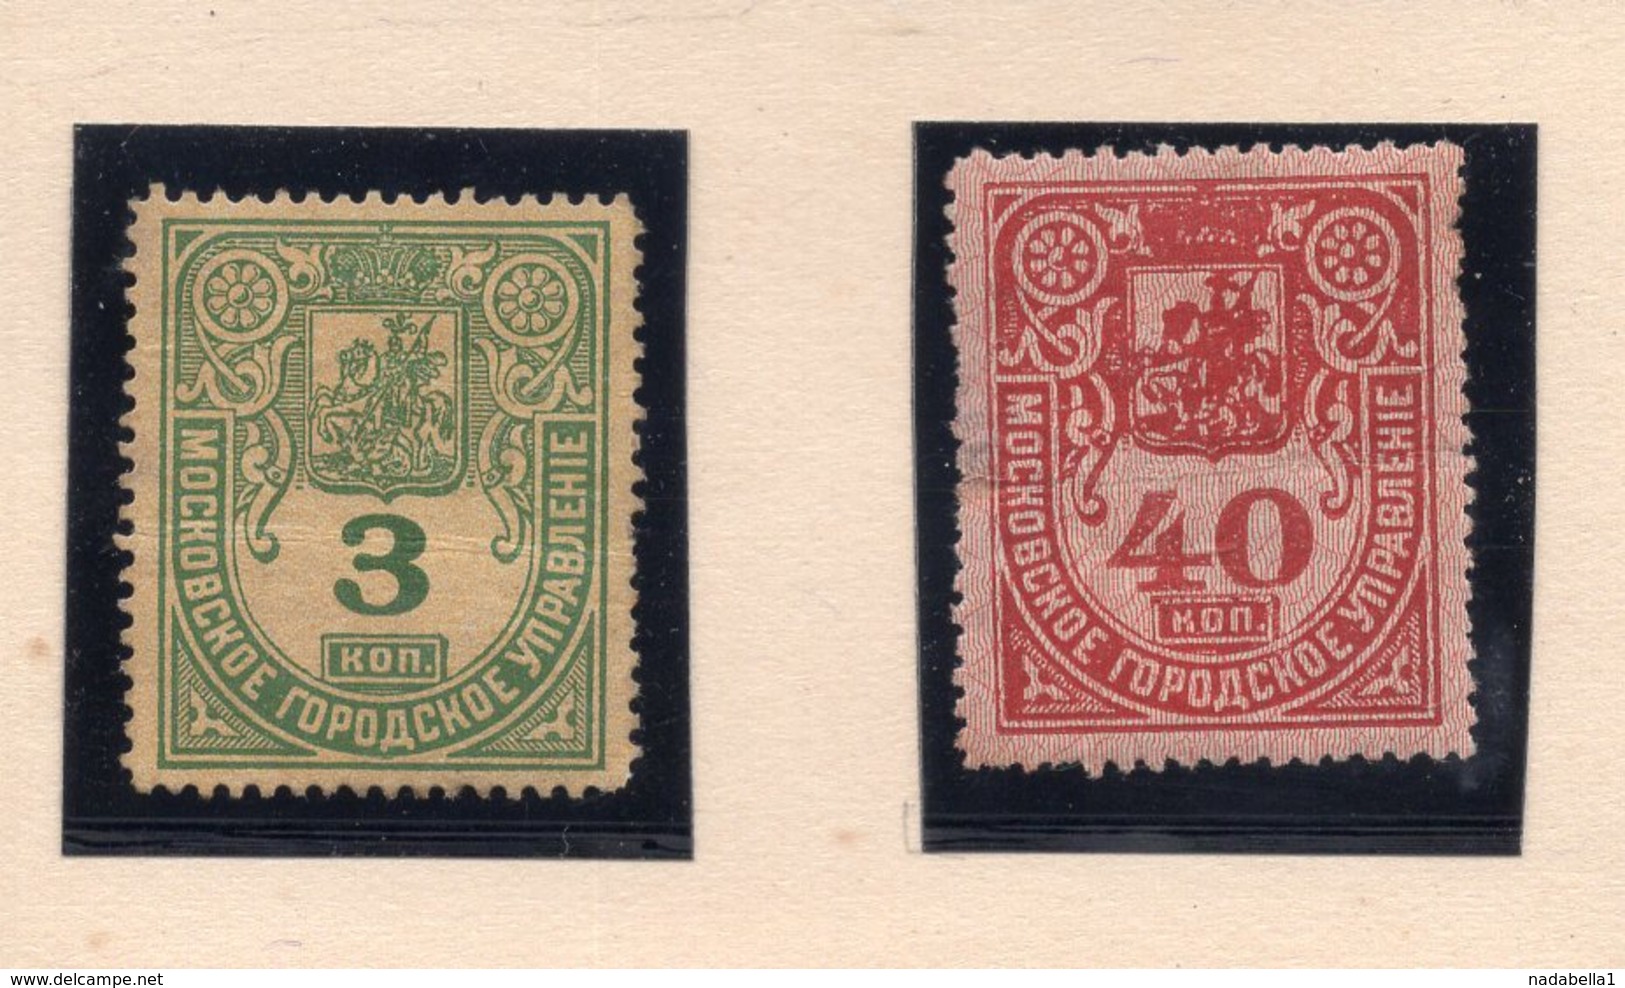 RUSSIA, MOSCOW, MUNICIPAL REVENUE STAMPS, 3 & 40 KOPEIKA, MH - Fiscali